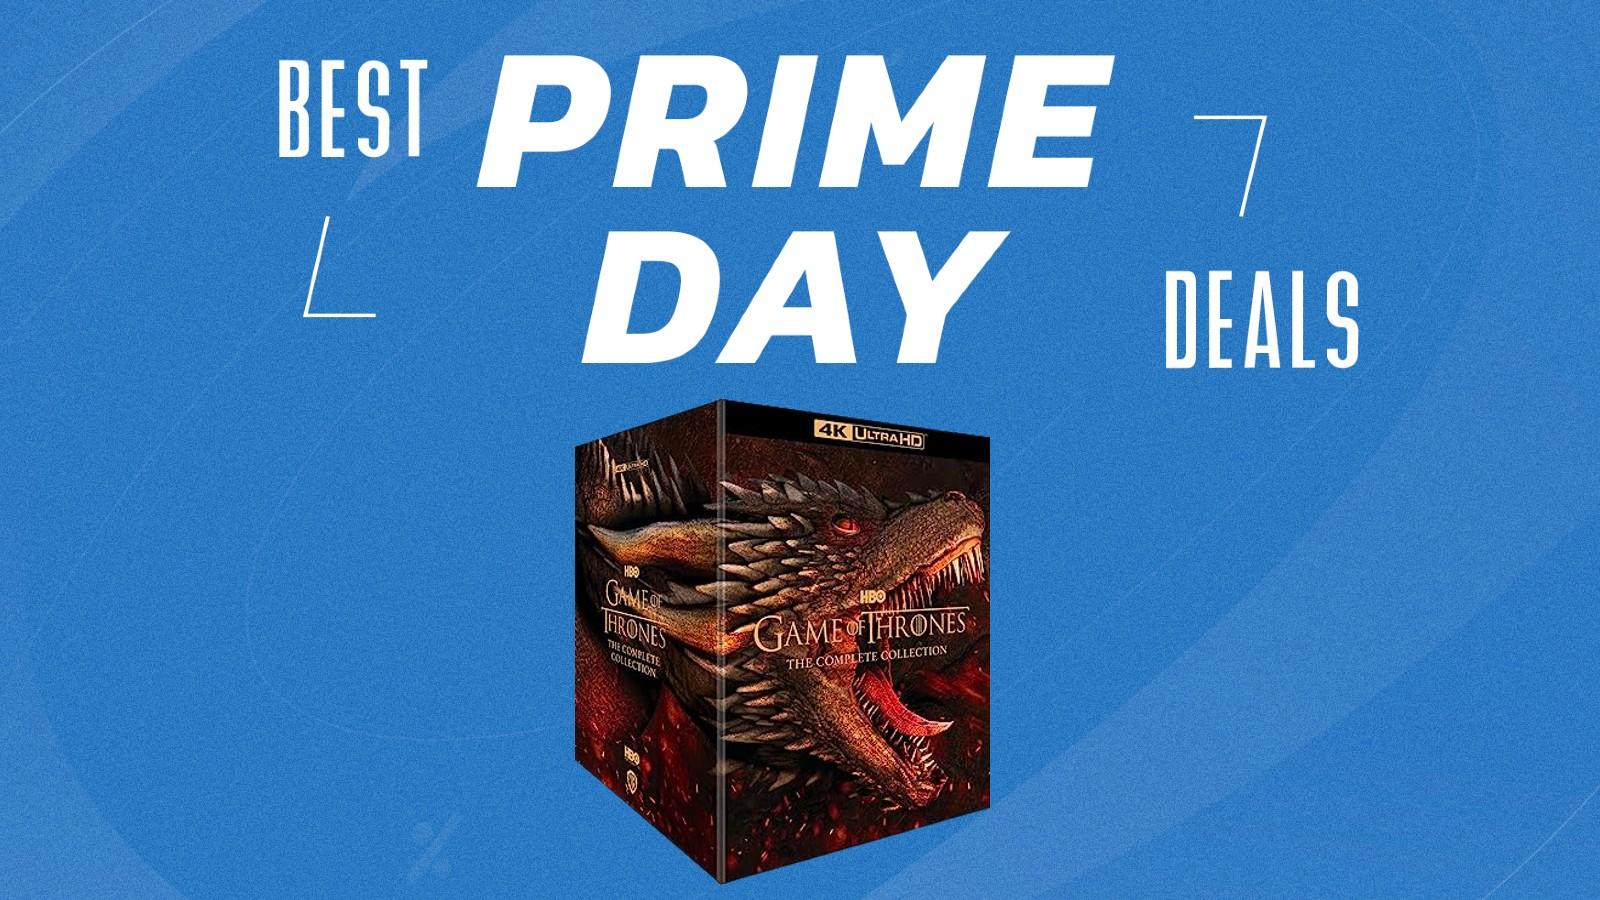 The complete Game of Thrones 4K collection available on the Prime Day movie deals